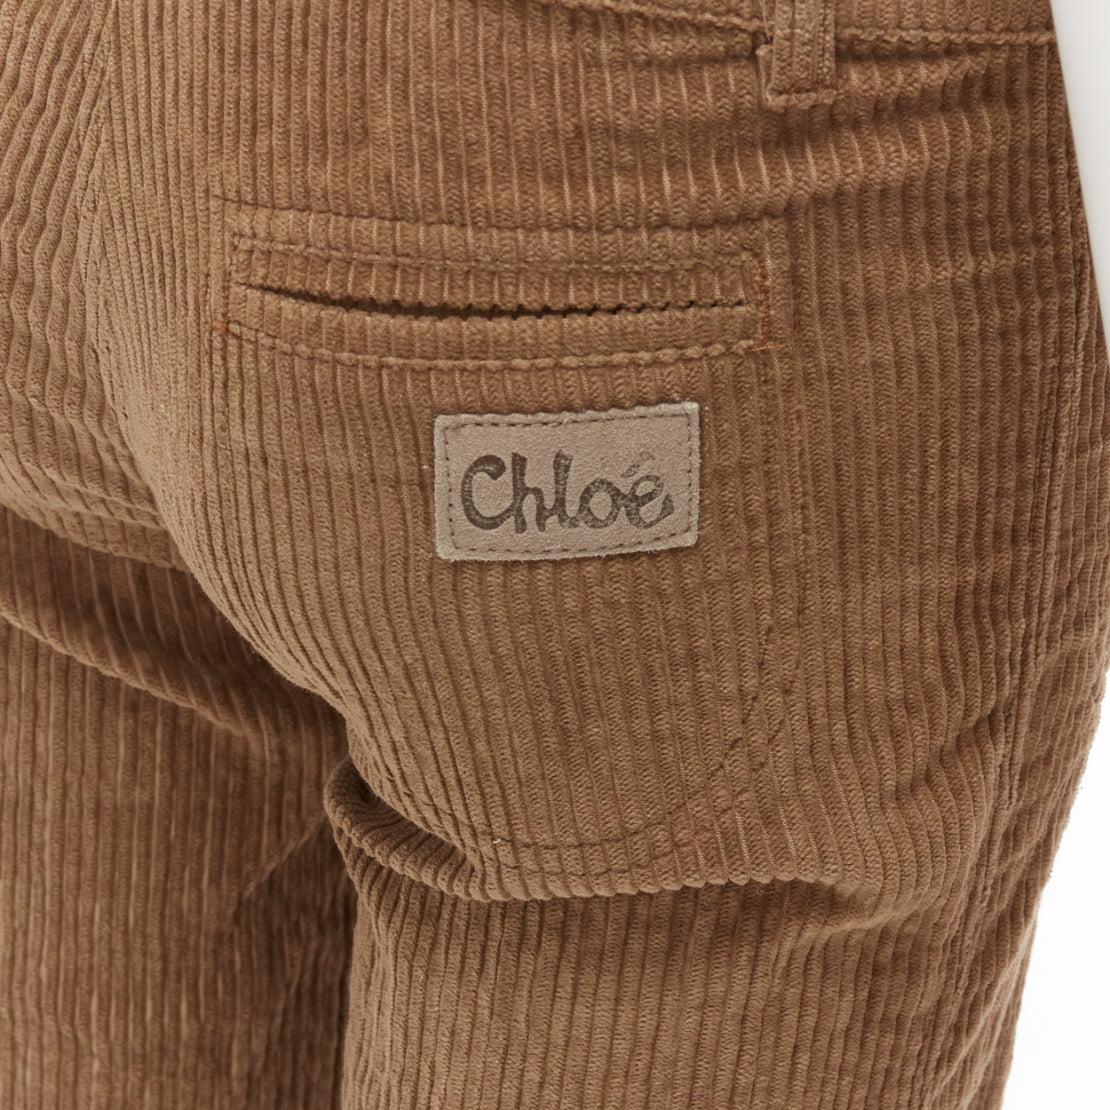 CHLOE brown cotton corduroy low waist flared pants FR34 XS
Reference: NKLL/A00207
Brand: Chloe
Material: Cotton, Blend
Color: Brown
Pattern: Solid
Closure: Zip Fly
Extra Details: Chloe logo tab at back right pocket.
Made in: